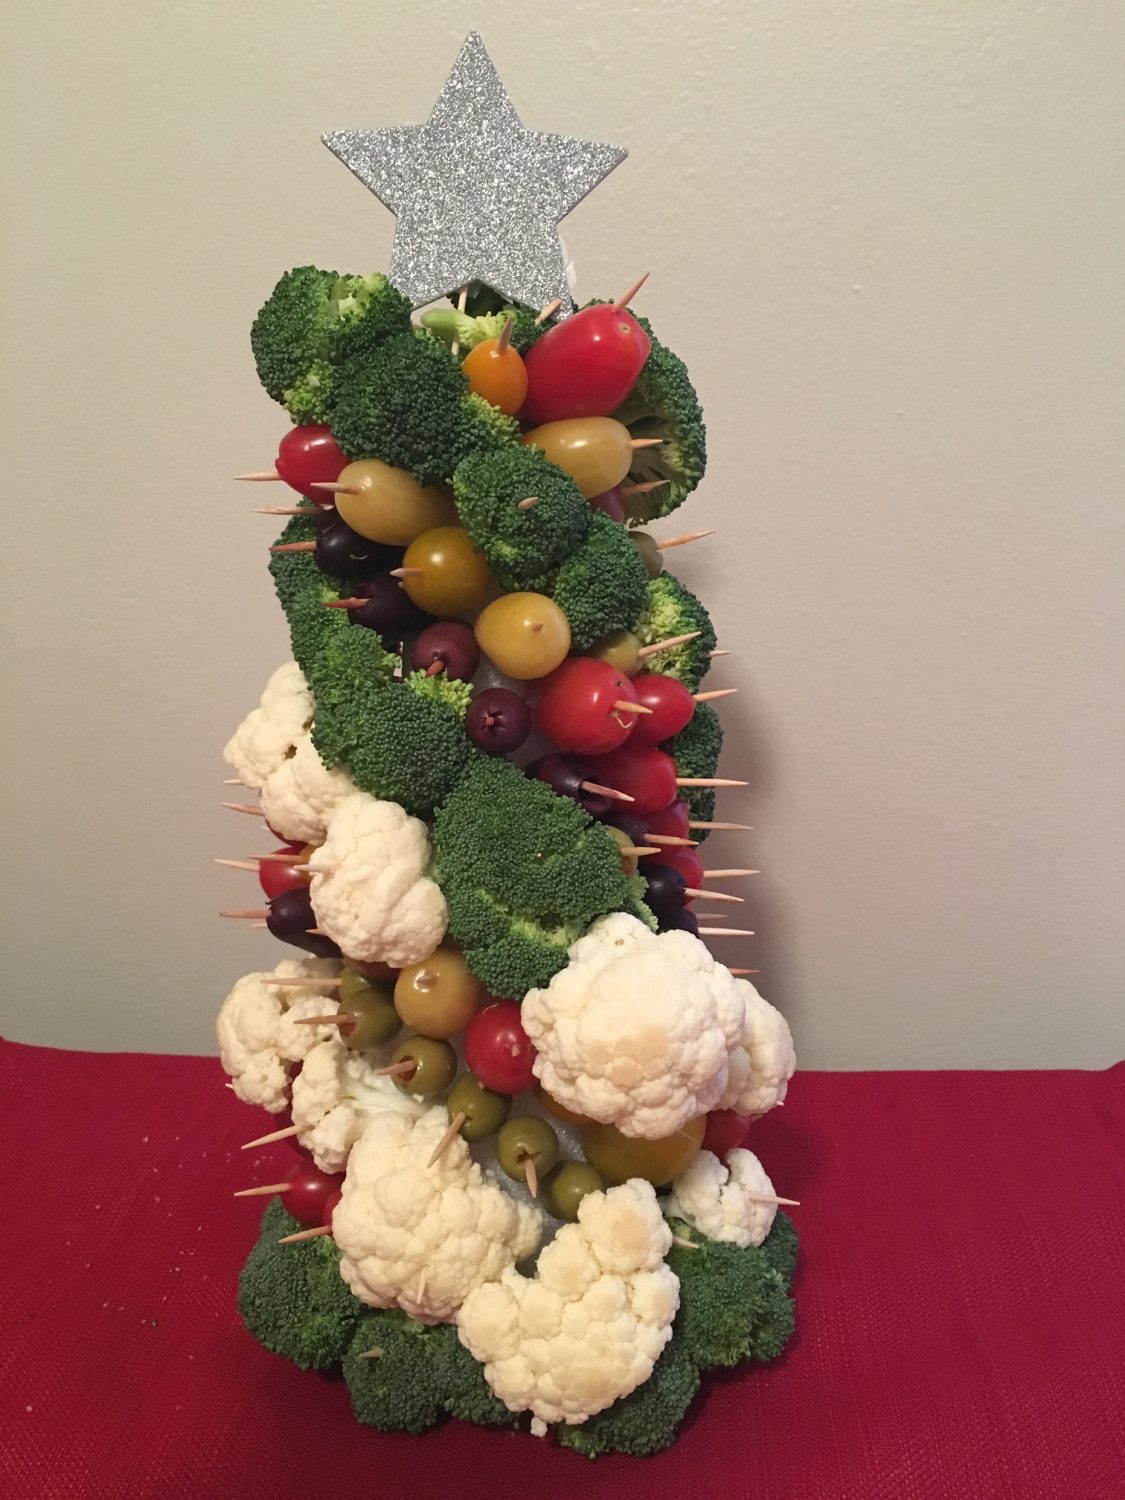 3D Vegetable Christmas Tree - Taste and Review